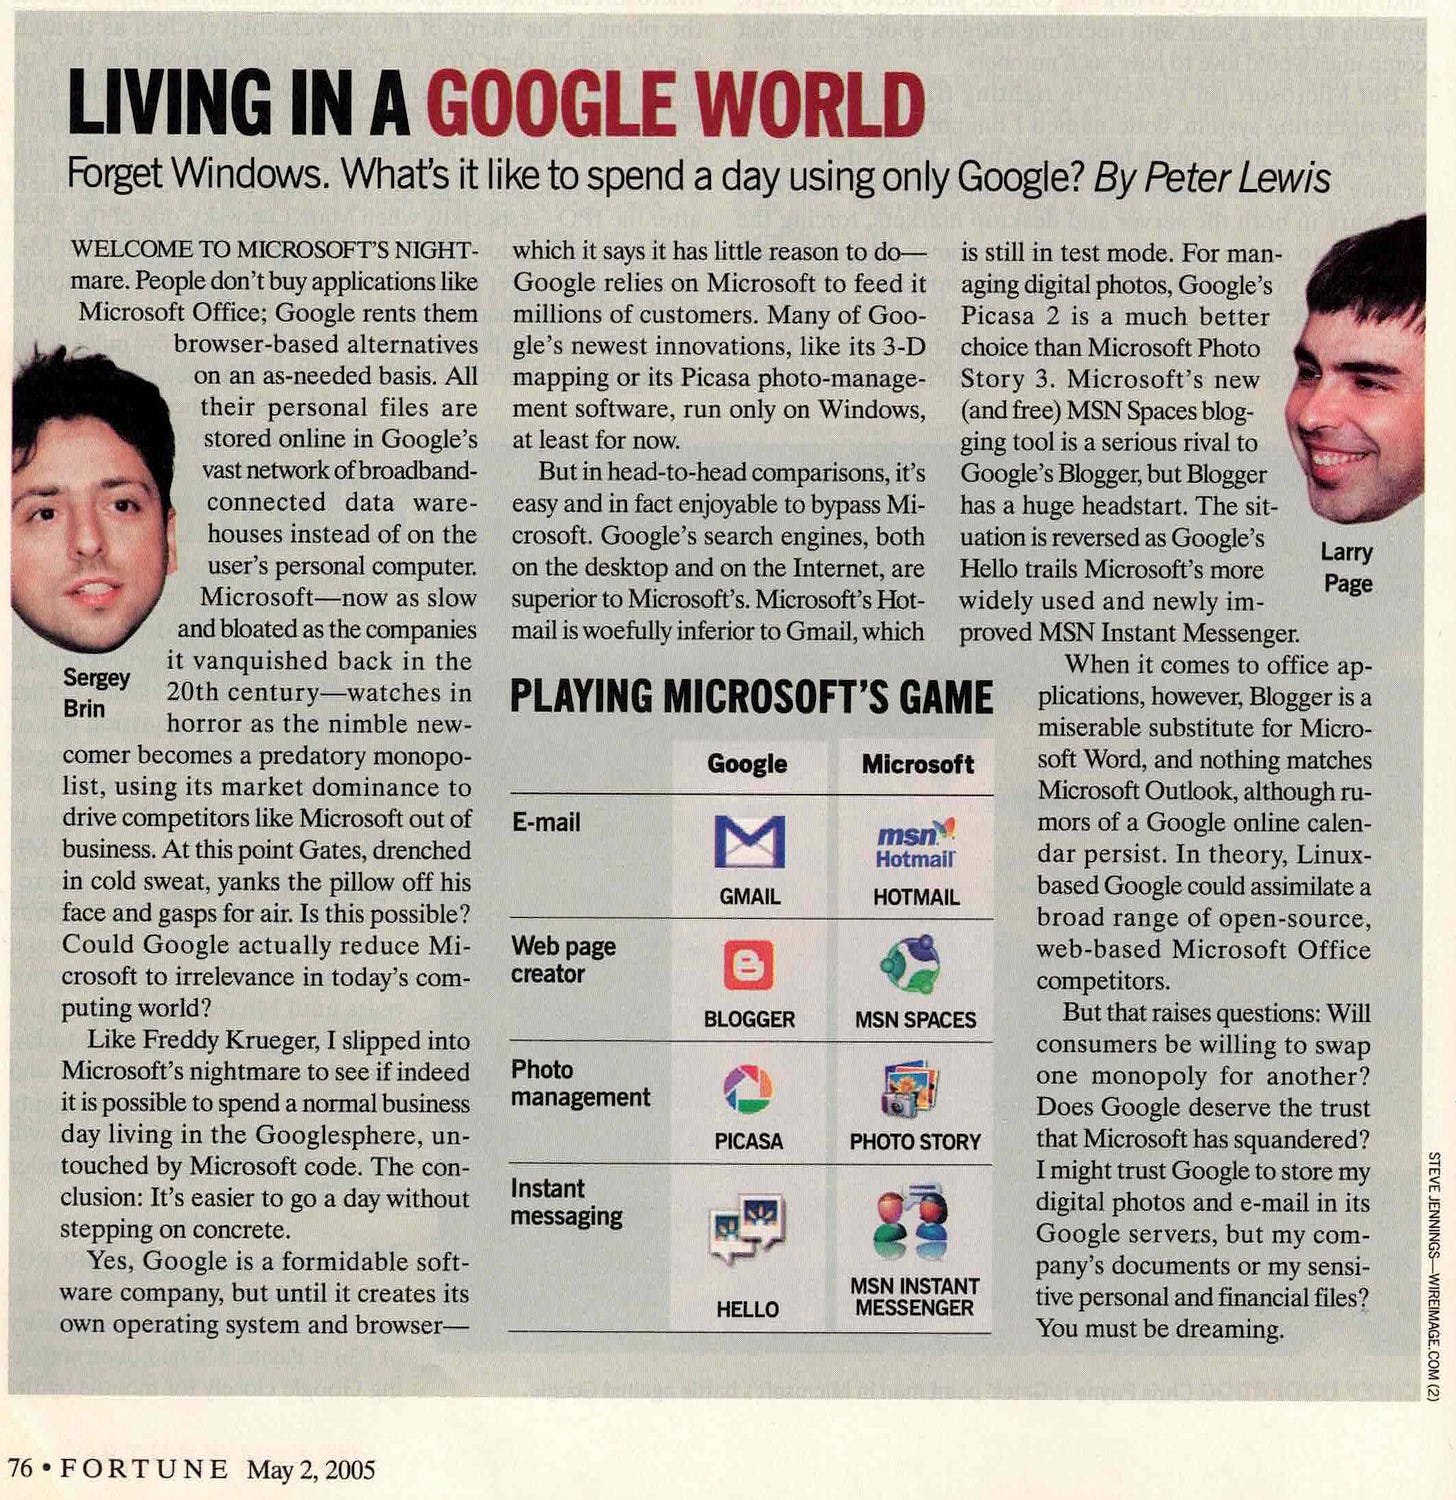 LIVING IN A GOOGLE WORLD Forget Windows. What's it like to spend a day using only Google? By Peter Lewis WELCOME TO MICROSOFT'S NIGHT- mare. People don't buy applications like Microsoft Office; Google rents them browser-based alternatives on an as-needed basis. All their personal files are stored online in Google's vast network of broadband- connected data ware- houses instead of on the user's personal computer. Microsoft-_now as slow and bloated as the companies it vanquished back in the Sergey Brin 20th century--watches in horror as the nimble new- comer becomes a predatory monopo- list, using its market dominance to drive competitors like Microsoft out of business. At this point Gates, drenched in cold sweat, yanks the pillow off his face and gasps for air. Is this possible? Could Google actually reduce Mi- crosoft to irrelevance in today's com- puting world? Like Freddy Krueger, I slipped into Microsoft's nightmare to see if indeed it is possible to spend a normal business day living in the Googlesphere, un- touched by Microsoft code. The con- clusion: It's easier to go a day without stepping on concrete. Yes, Google is a formidable soft- ware company, but until it creates its own operating system and browser- which it says it has little reason to do- Google relies on Microsoft to feed it millions of customers. Many of Goo- gle's newest innovations, like its 3-D mapping or its Picasa photo-manage- ment software, run only on Windows, at least for now. But in head-to-head comparisons, it's easy and in fact enjoyable to bypass Mi- crosoft. Google's search engines, both on the desktop and on the Internet, are superior to Microsoft's. Microsoft's Hot- mail is woefully inferior to Gmail, which PLAYING MICROSOFT'S GAME Google Microsoft E-mail msn? Hotmail GMAIL HOTMAIL Web page creator e BLOGGER MSN SPACES Photo management PICASA PHOTO STORY Instant messaging HELLO MSN INSTANT MESSENGER is still in test mode. For man- aging digital photos, Google's Picasa 2 is a much better choice than Microsoft Photo Story 3. Microsoft's new (and free) MSN Spaces blog- ging tool is a serious rival to Google's Blogger, but Blogger has a huge headstart. The sit- uation is reversed as Google's Hello trails Microsoft's more Larry Page widely used and newly im- proved MSN Instant Messenger. When it comes to office ap- plications, however, Blogger is a miserable substitute for Micro- soft Word, and nothing matches Microsoft Outlook, although ru- mors of a Google online calen- dar persist. In theory, Linux- based Google could assimilate a broad range of open-source, web-based Microsoft Office competitors. But that raises questions: Will consumers be willing to swap one monopoly for another? Does Google deserve the trust that Microsoft has squandered? I might trust Google to store my digital photos and e-mail in its Google servers, but my com- pany's documents or my sensi- tive personal and financial files? You must be dreaming. 76 FORTUNE May 2, 2005 STEVE JENNINGS-_WIREIMAGE.COM (2)